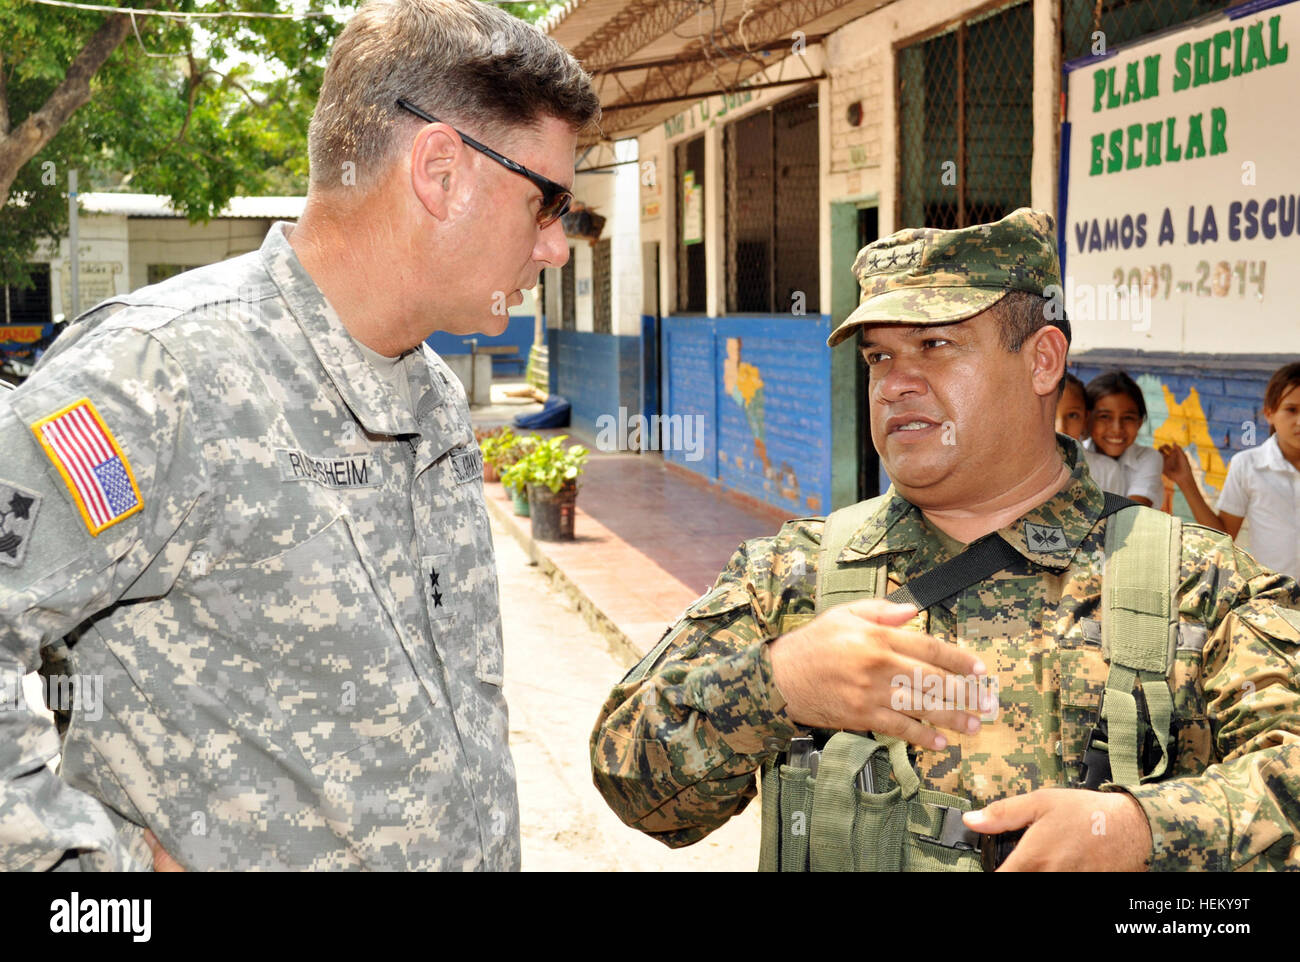 U.S. Army Maj. Gen. Frederick Rudesheim, left, the commanding general of U.S. Army South discusses construction progress and security with Salvadoran Col. Elmer Enrique Arevalo, the security battalion commander, as they tour the site of a new schoolhouse during Beyond the Horizon at Rancho San Marcos, El Salvador, May 8, 2013. Beyond the Horizon is a Chairman of the Joint Chiefs of Staff-directed, U.S. Southern Command-sponsored joint and combined field training humanitarian exercise in which troops specializing in engineering, construction and health care provide much-needed services to commu Stock Photo